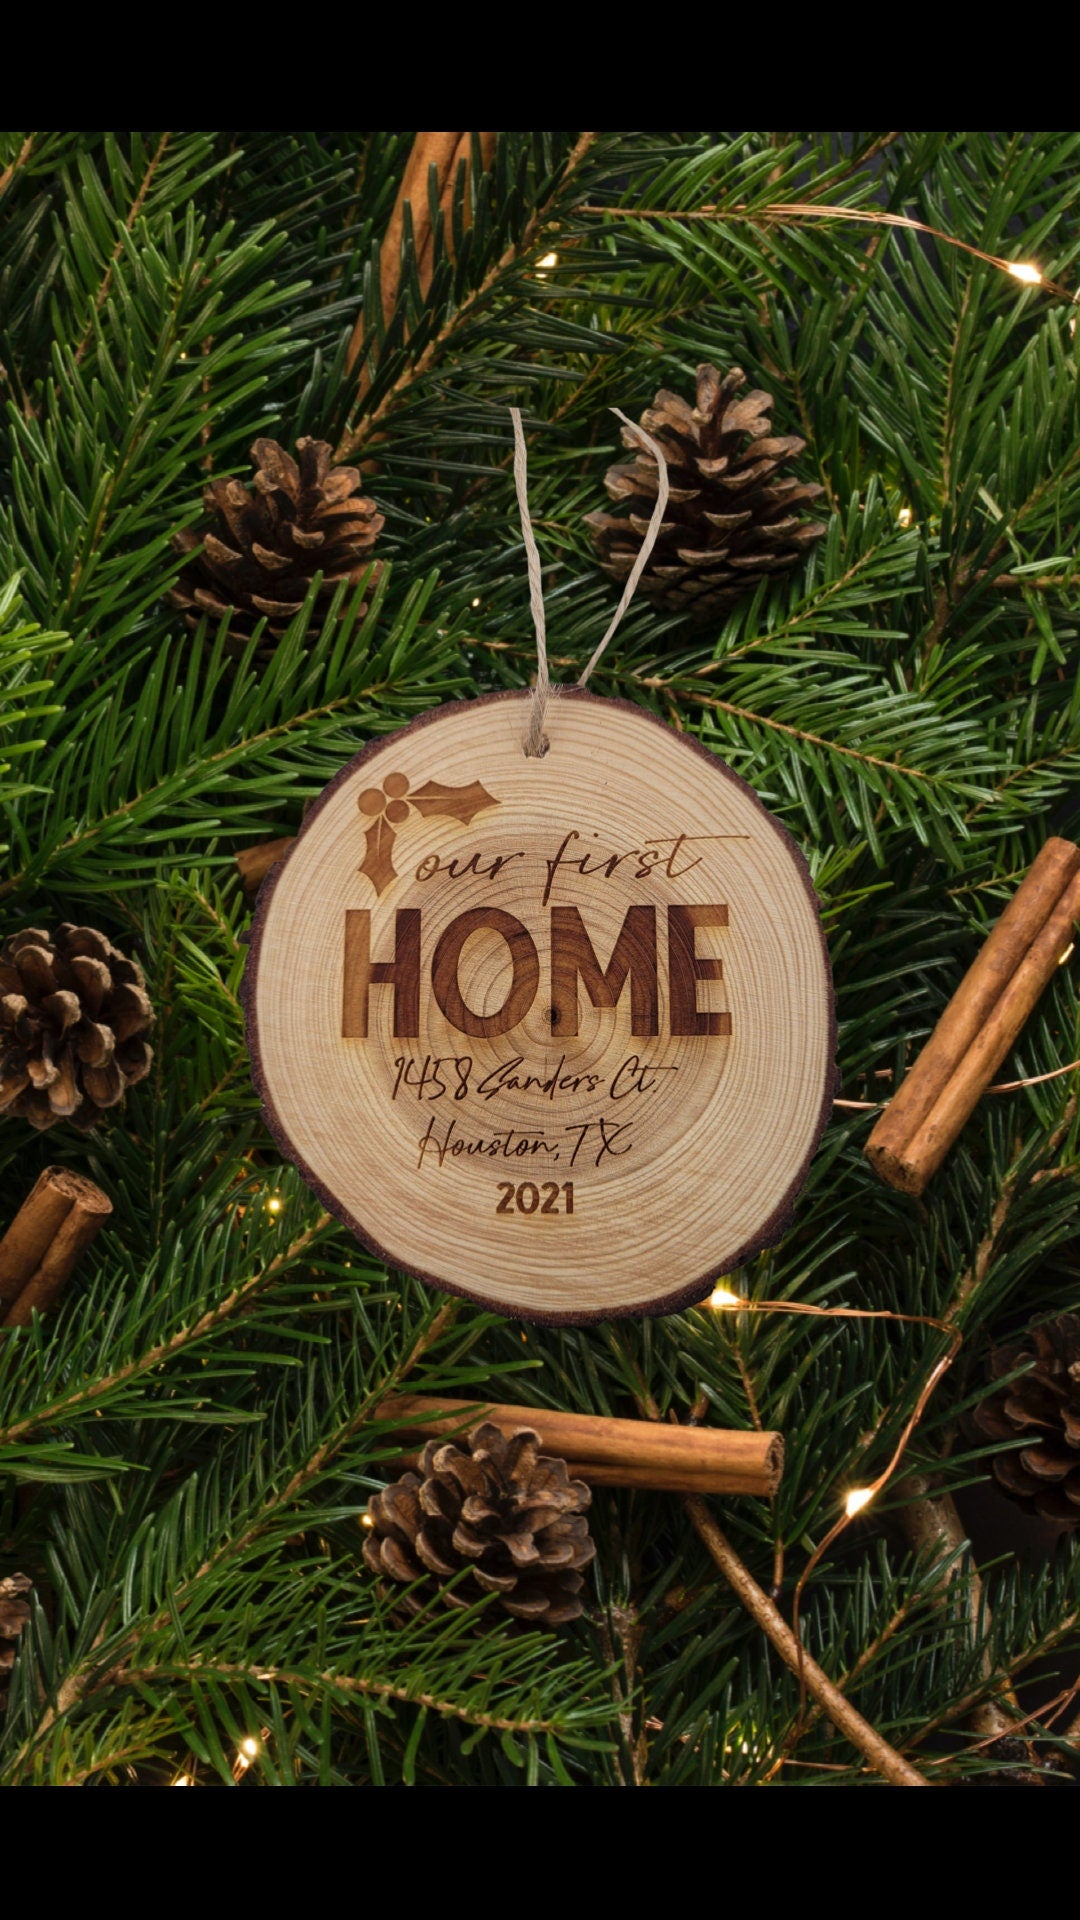 Personalized Ornament - Our First Home Wooden Ornament - Christmas Tree Wood Slice Ornament - Christmas gift - Housewarming Gift